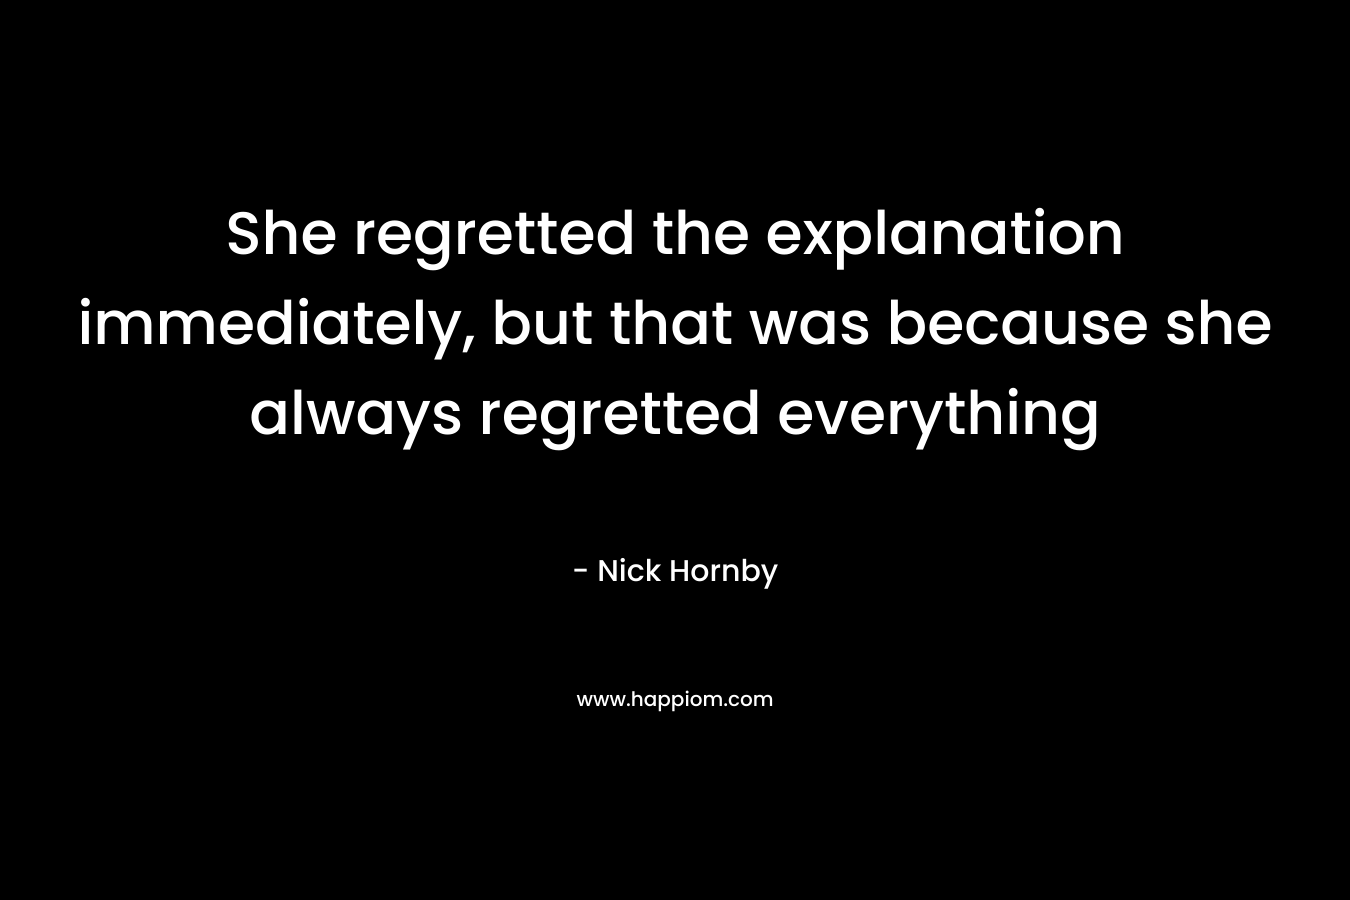 She regretted the explanation immediately, but that was because she always regretted everything